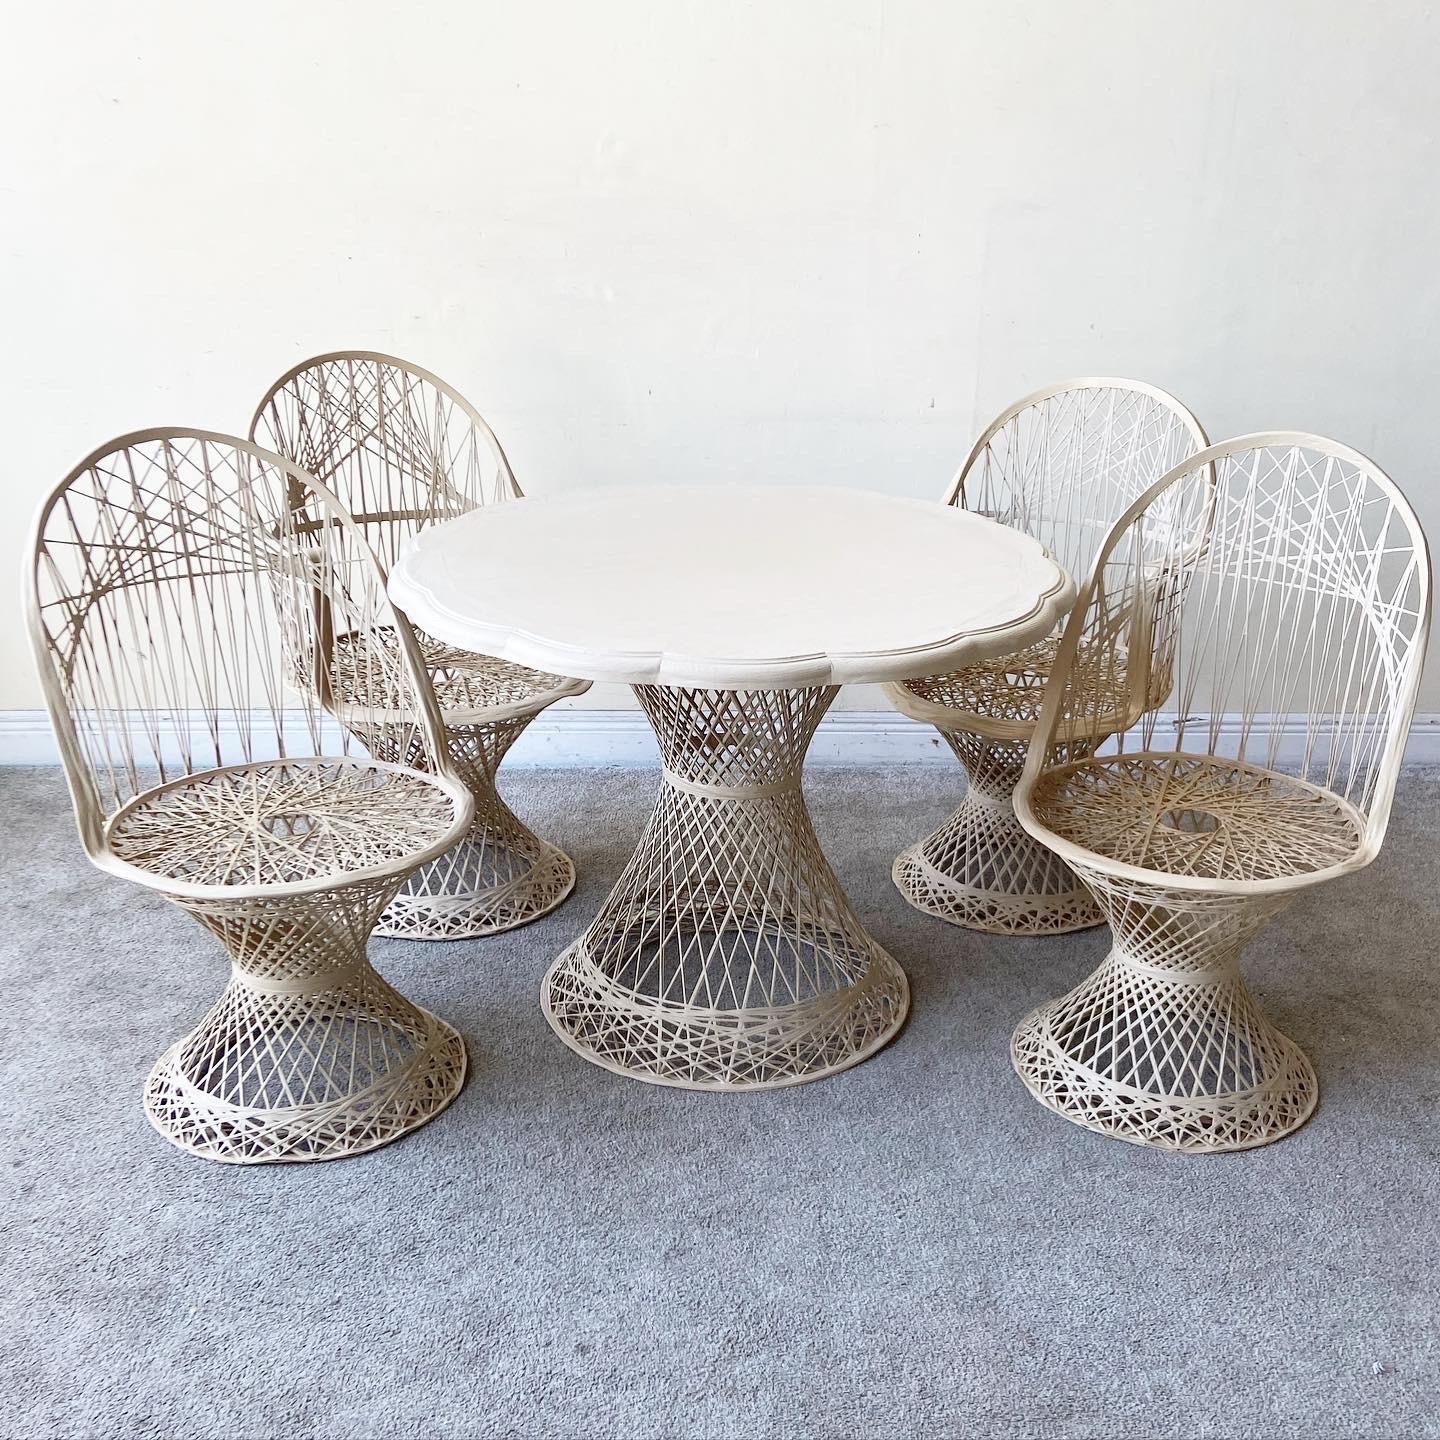 Incredible Mid-Century Modern Russell Woodard spun fiberglass dining set. Features two arm chairs and two side chairs with a matching dining table.

Table measures 40.5” D, 29.5” H.